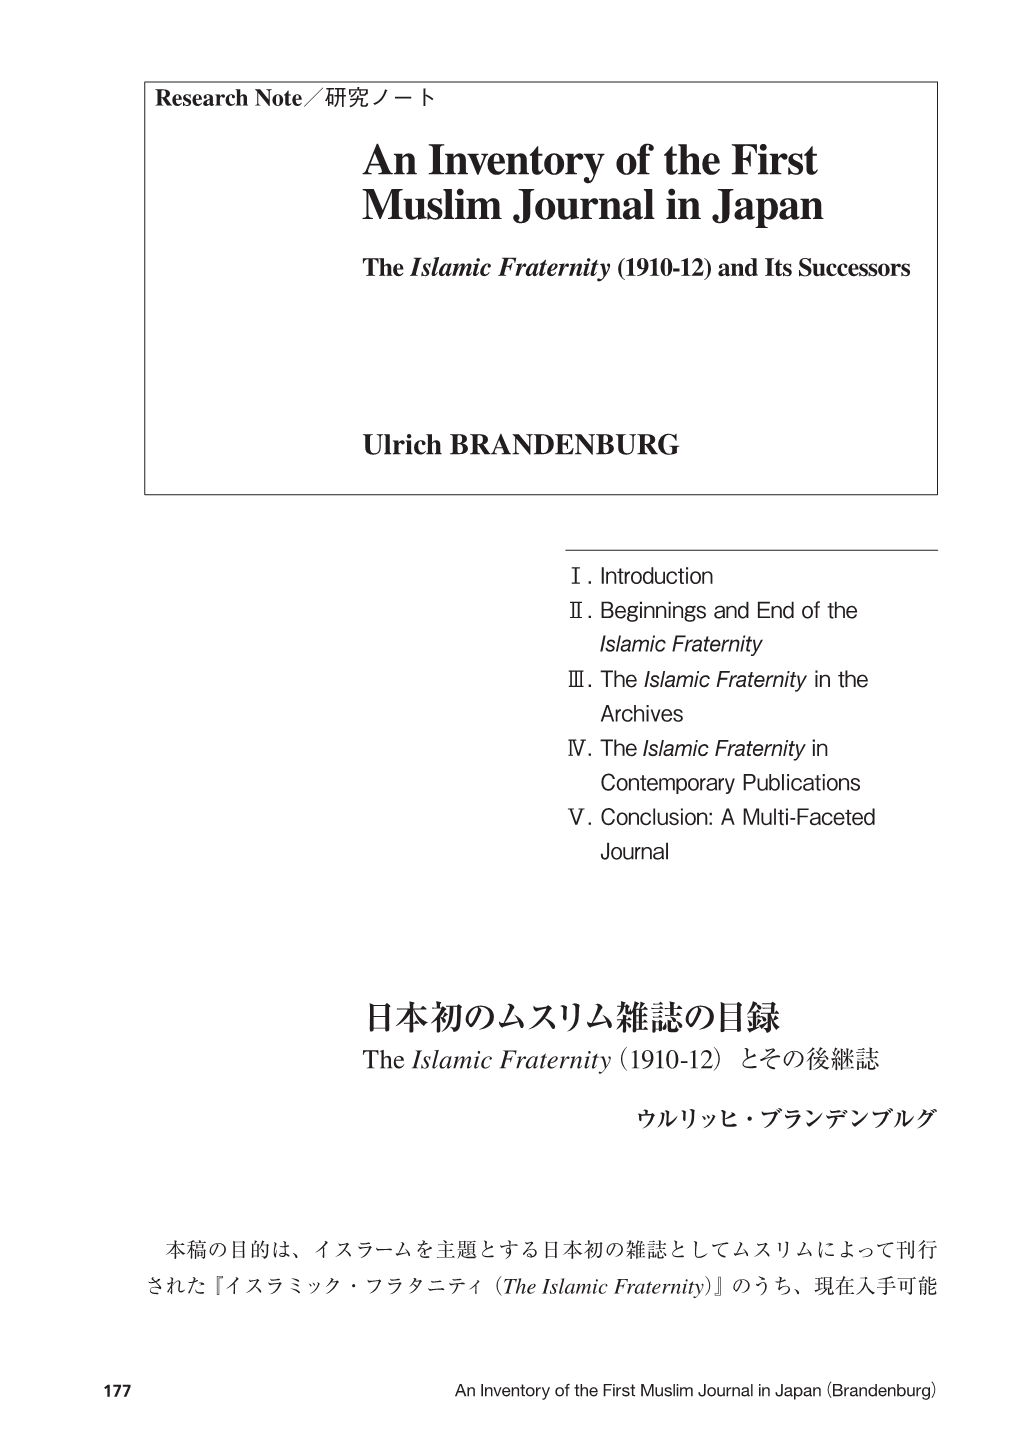 An Inventory of the First Muslim Journal in Japan the Islamic Fraternity (1910-12) and Its Successors